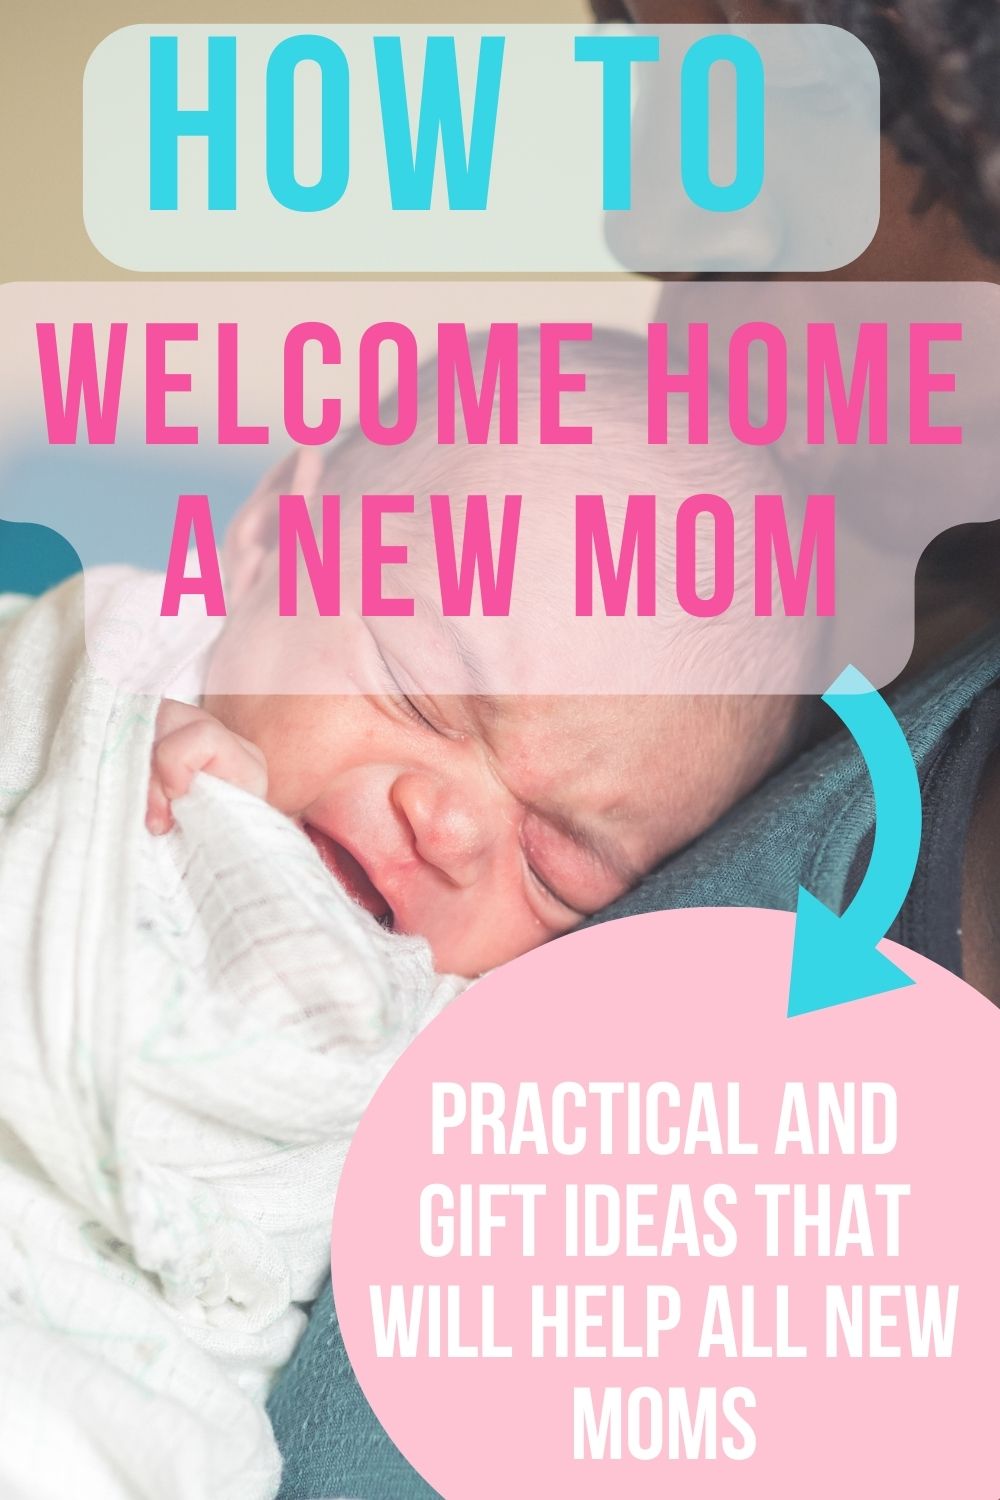 Welcome home a new mom